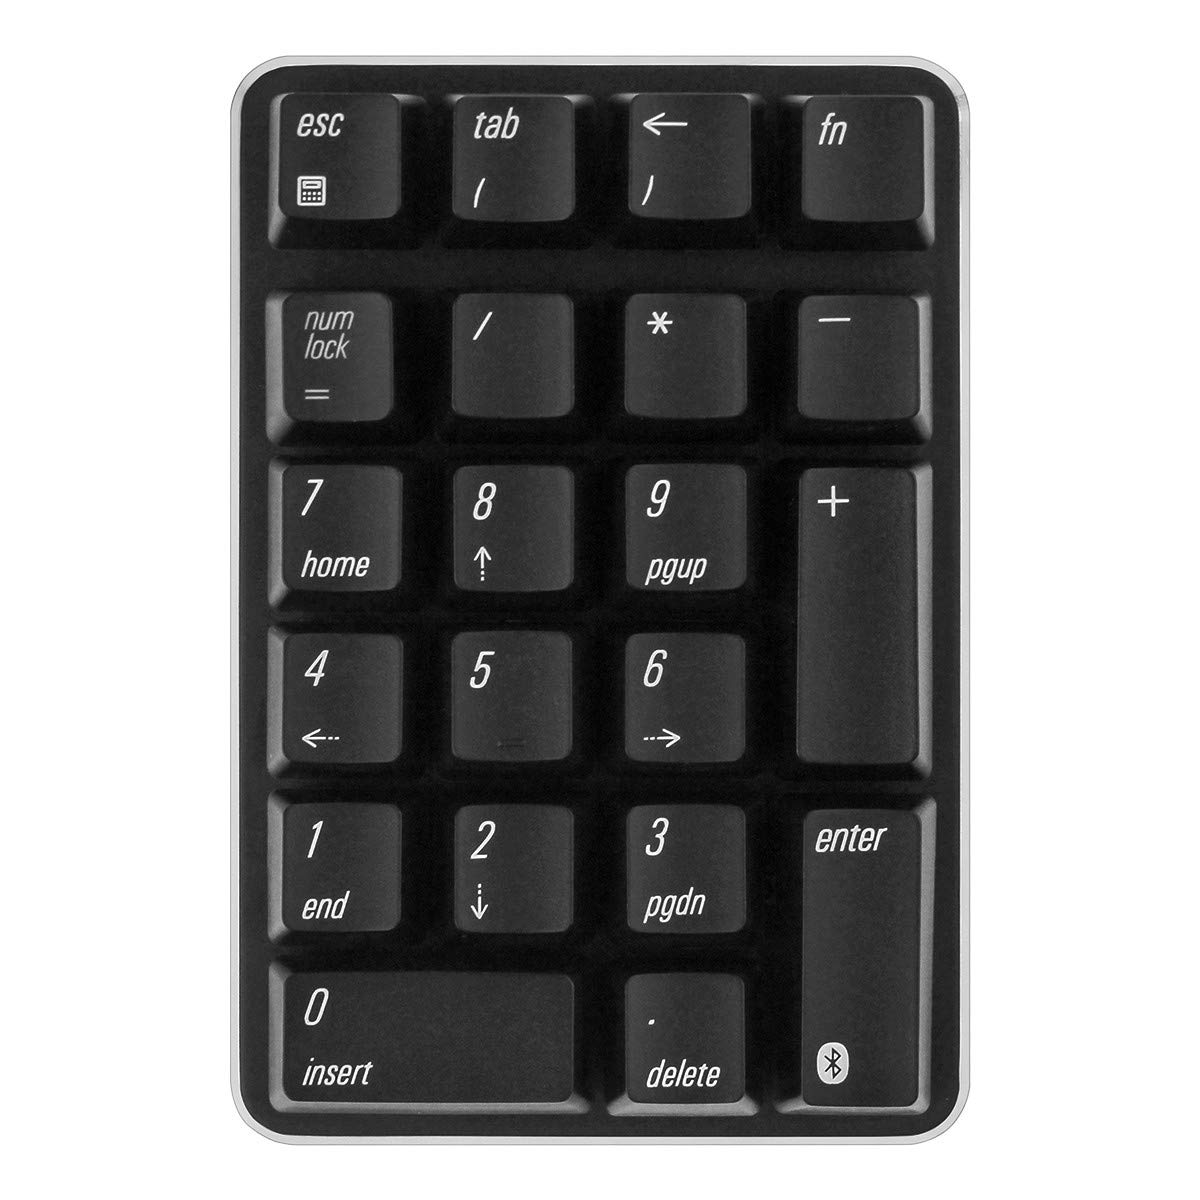 Keyboard with NumLock key crossed out.